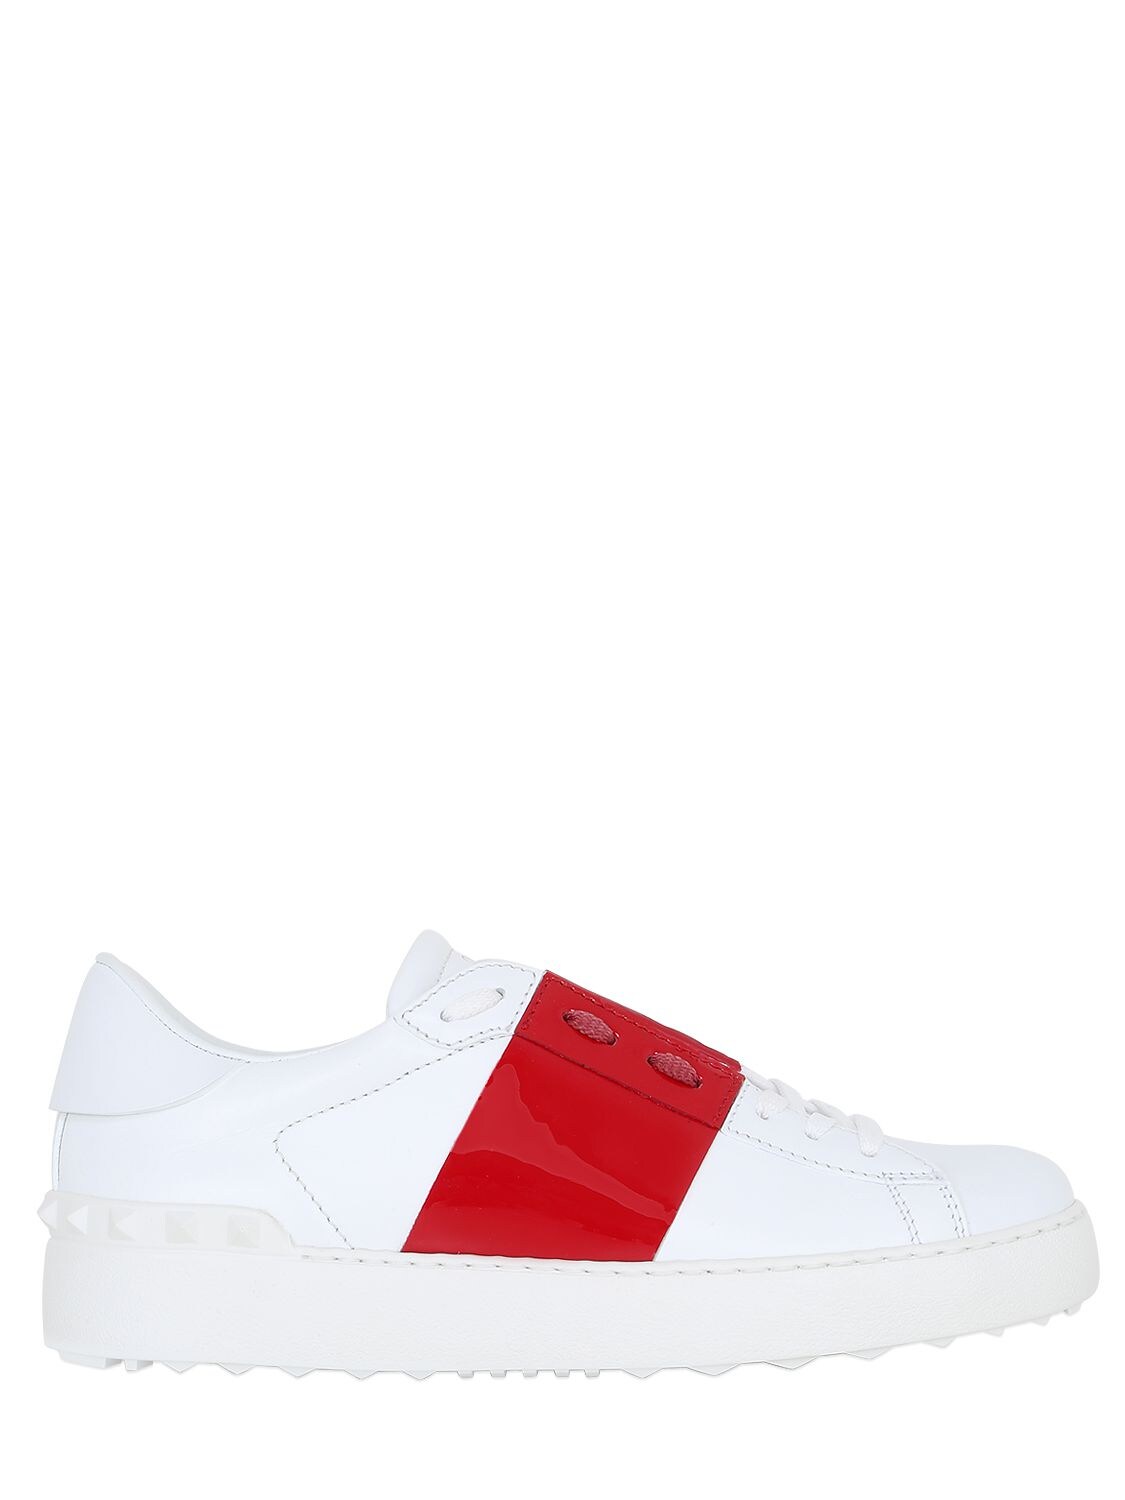 Valentino Garavani Open Leather Sneakers With Patent Band In White/red